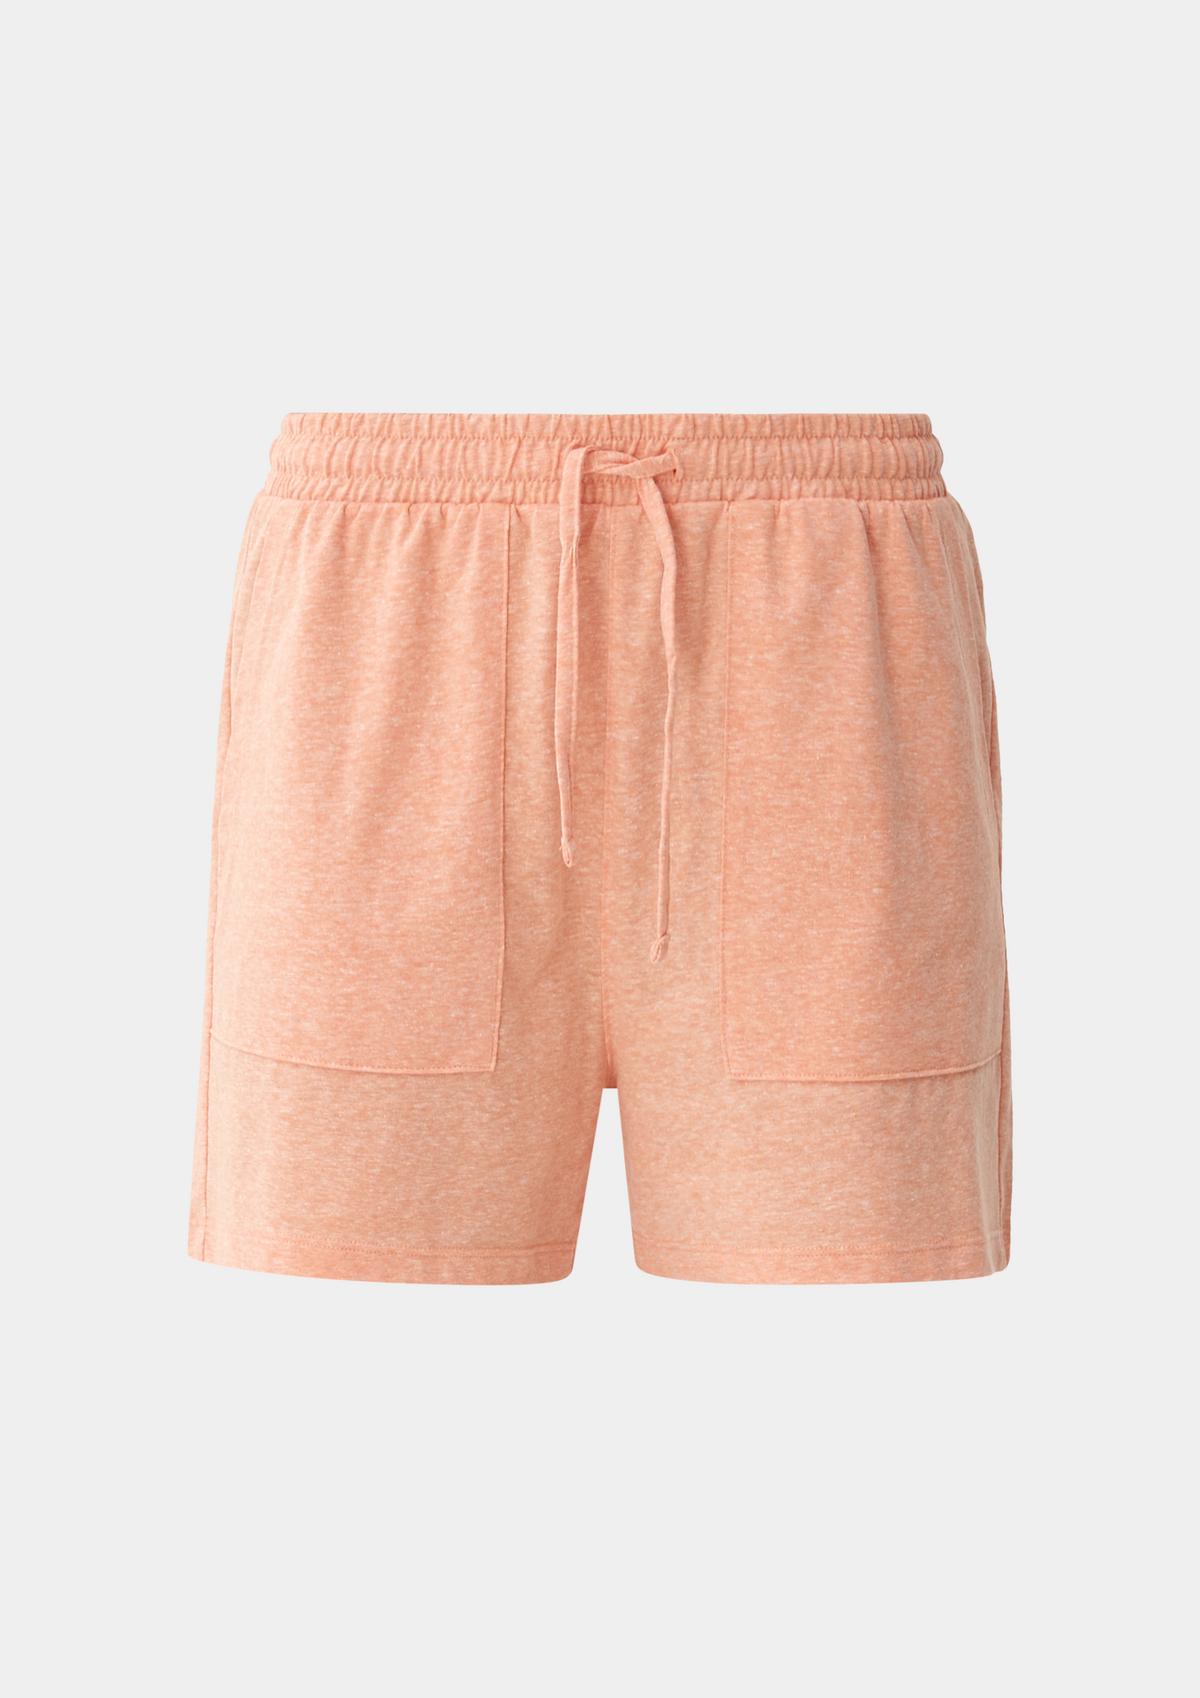 s.Oliver Relaxed: Shorts aus Baumwollmix